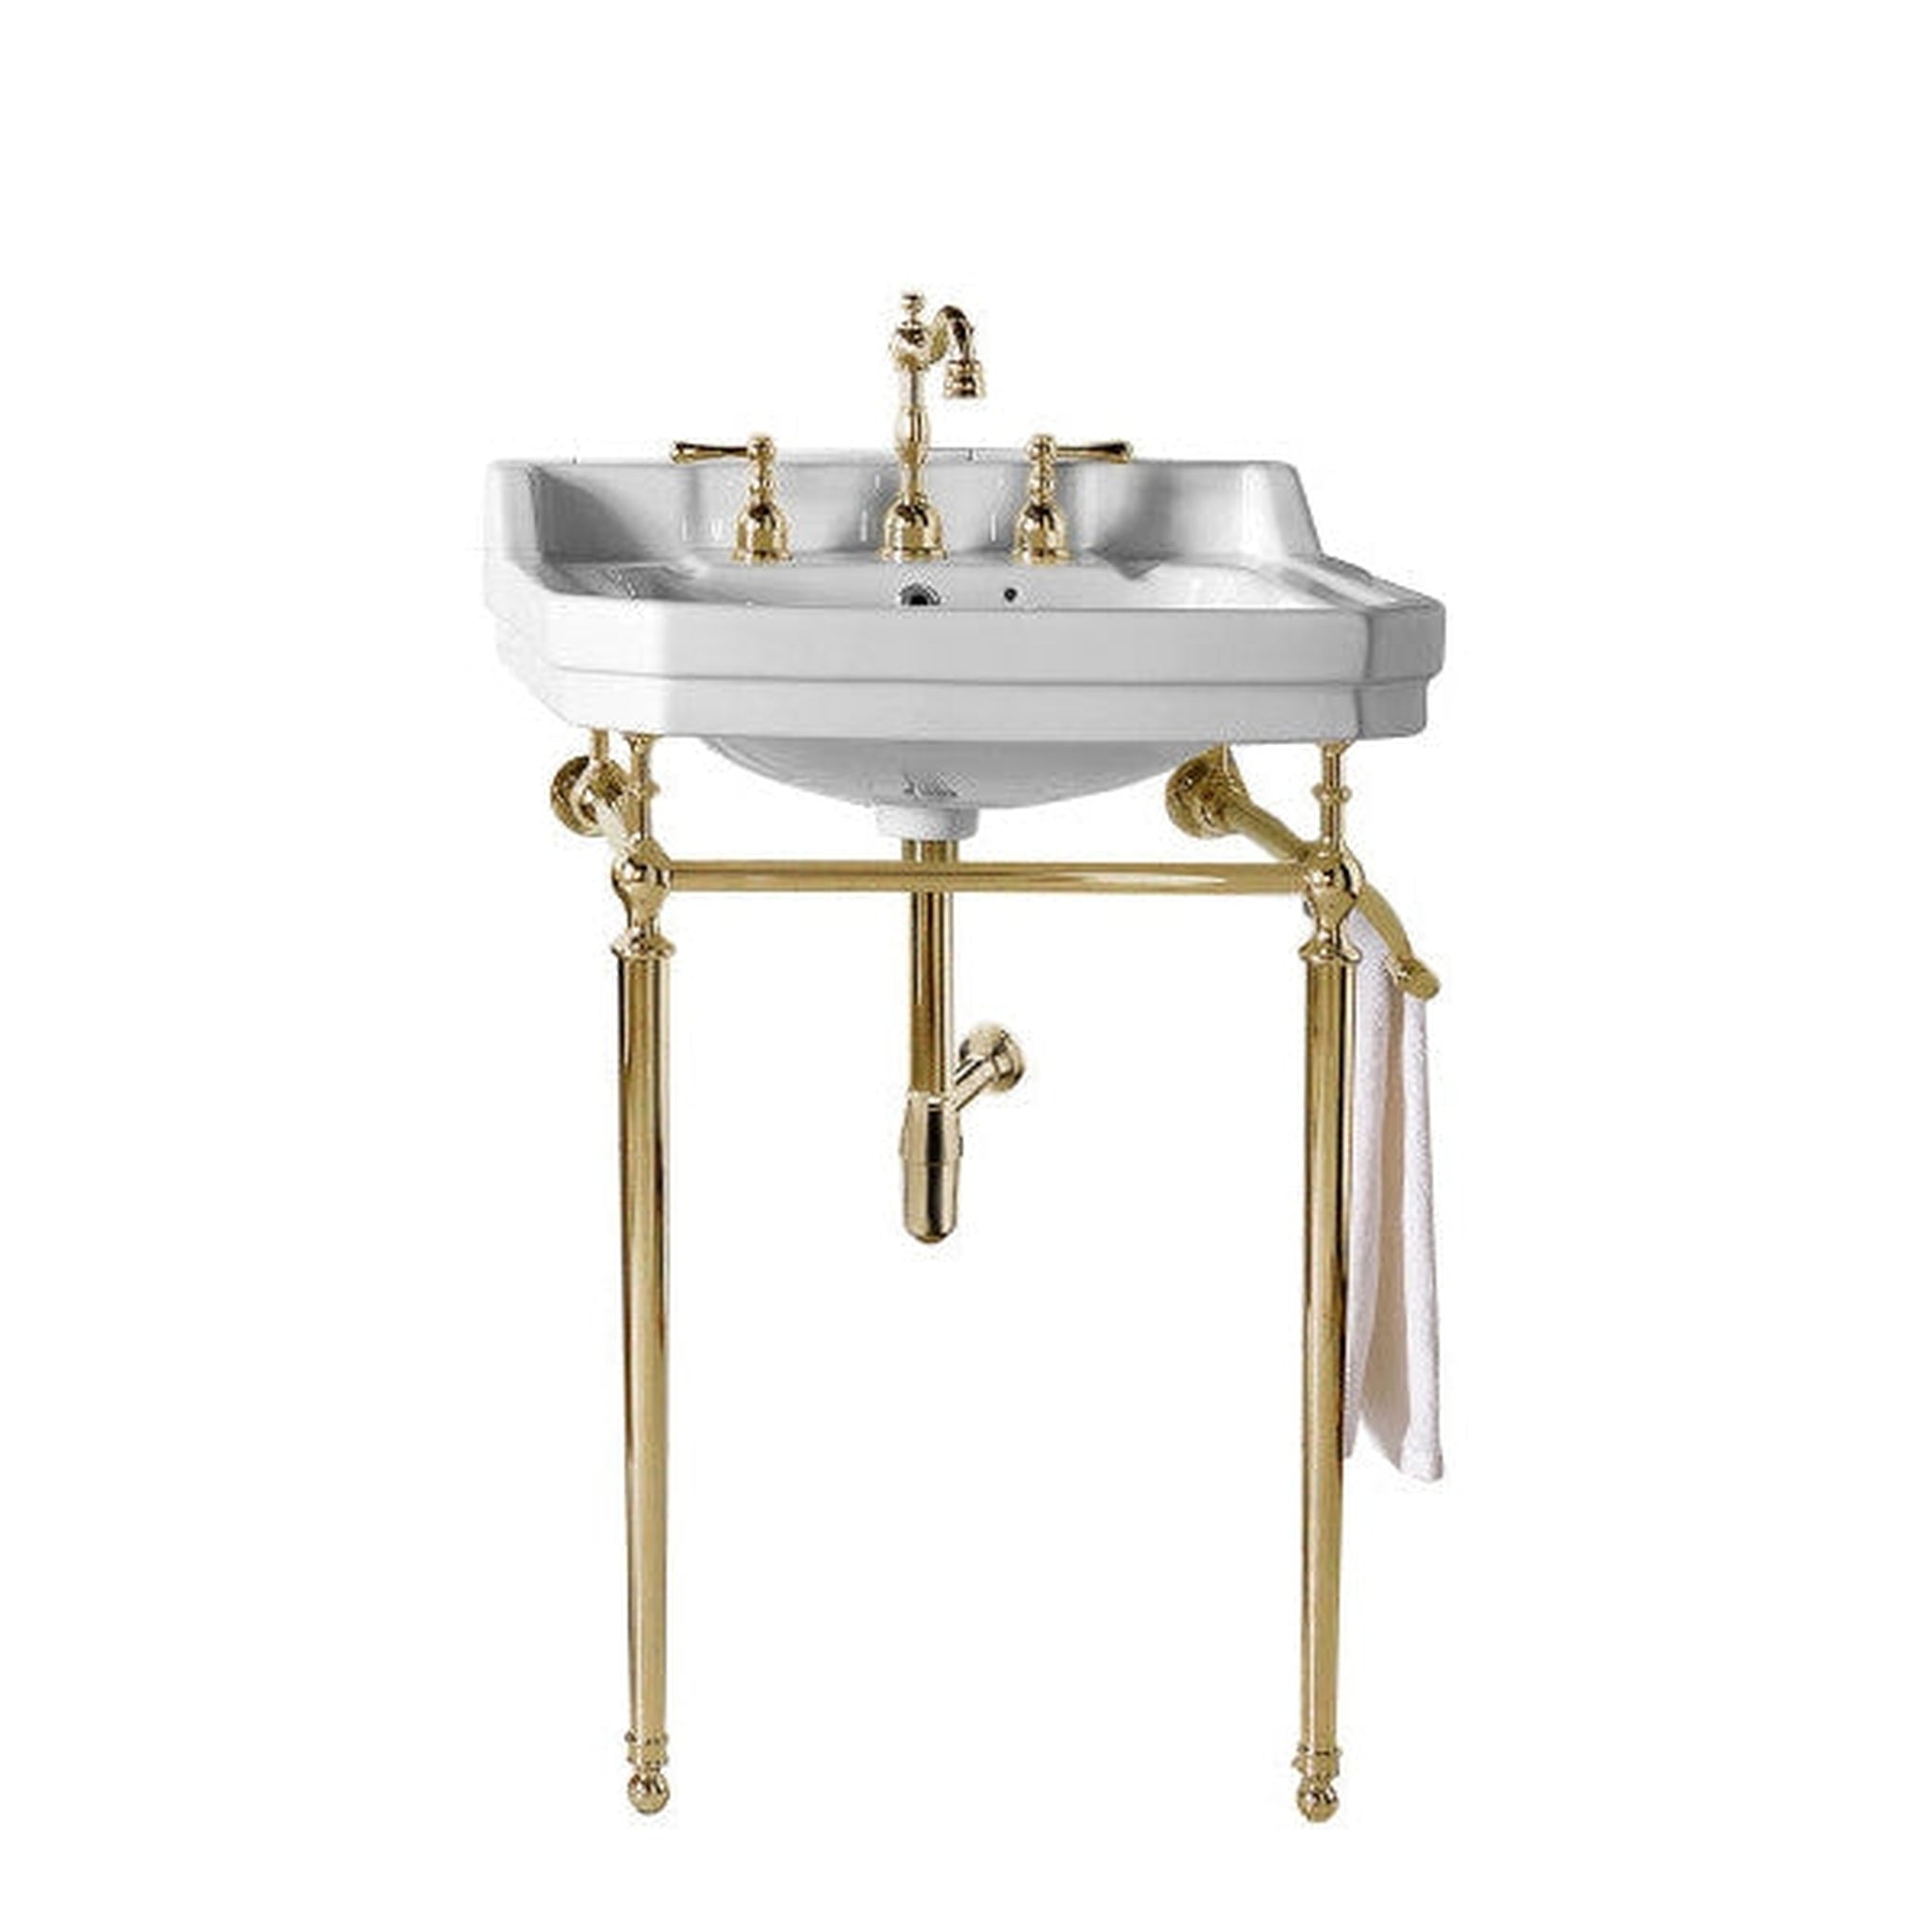 James Martin Vanities, James Martin Wellington 24" Single Console Sink With Brass Finish Stand